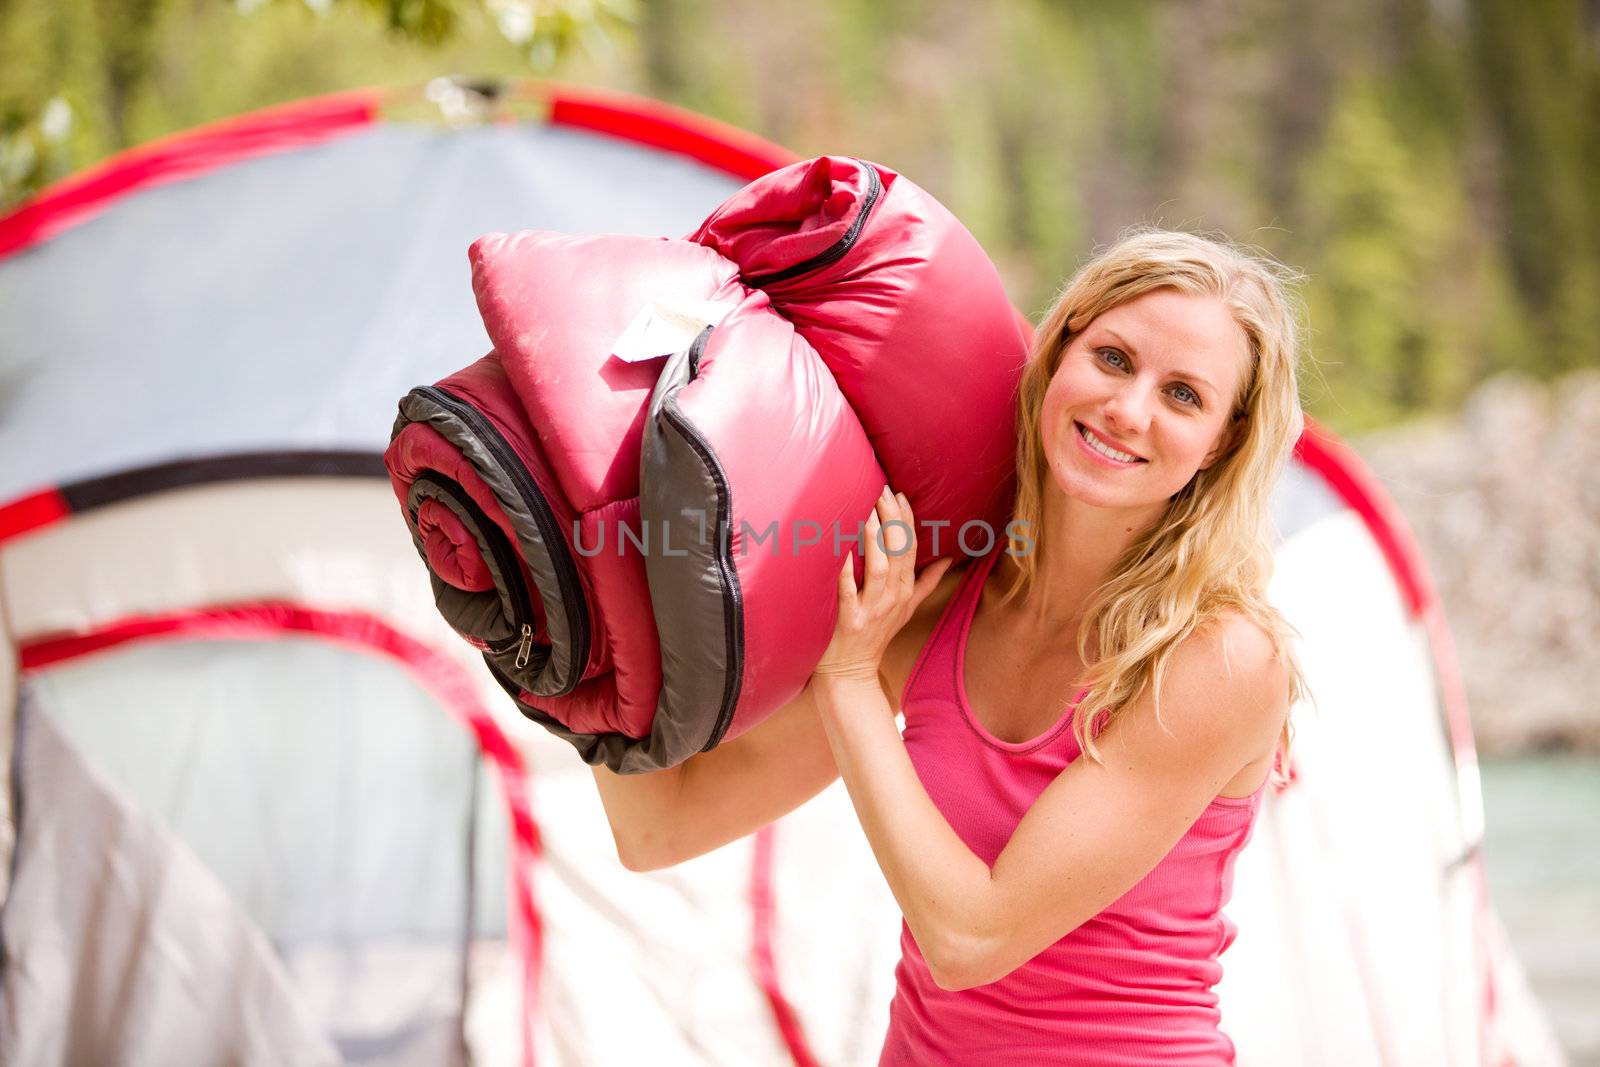 A portrait of a woman holding a sleeping bag